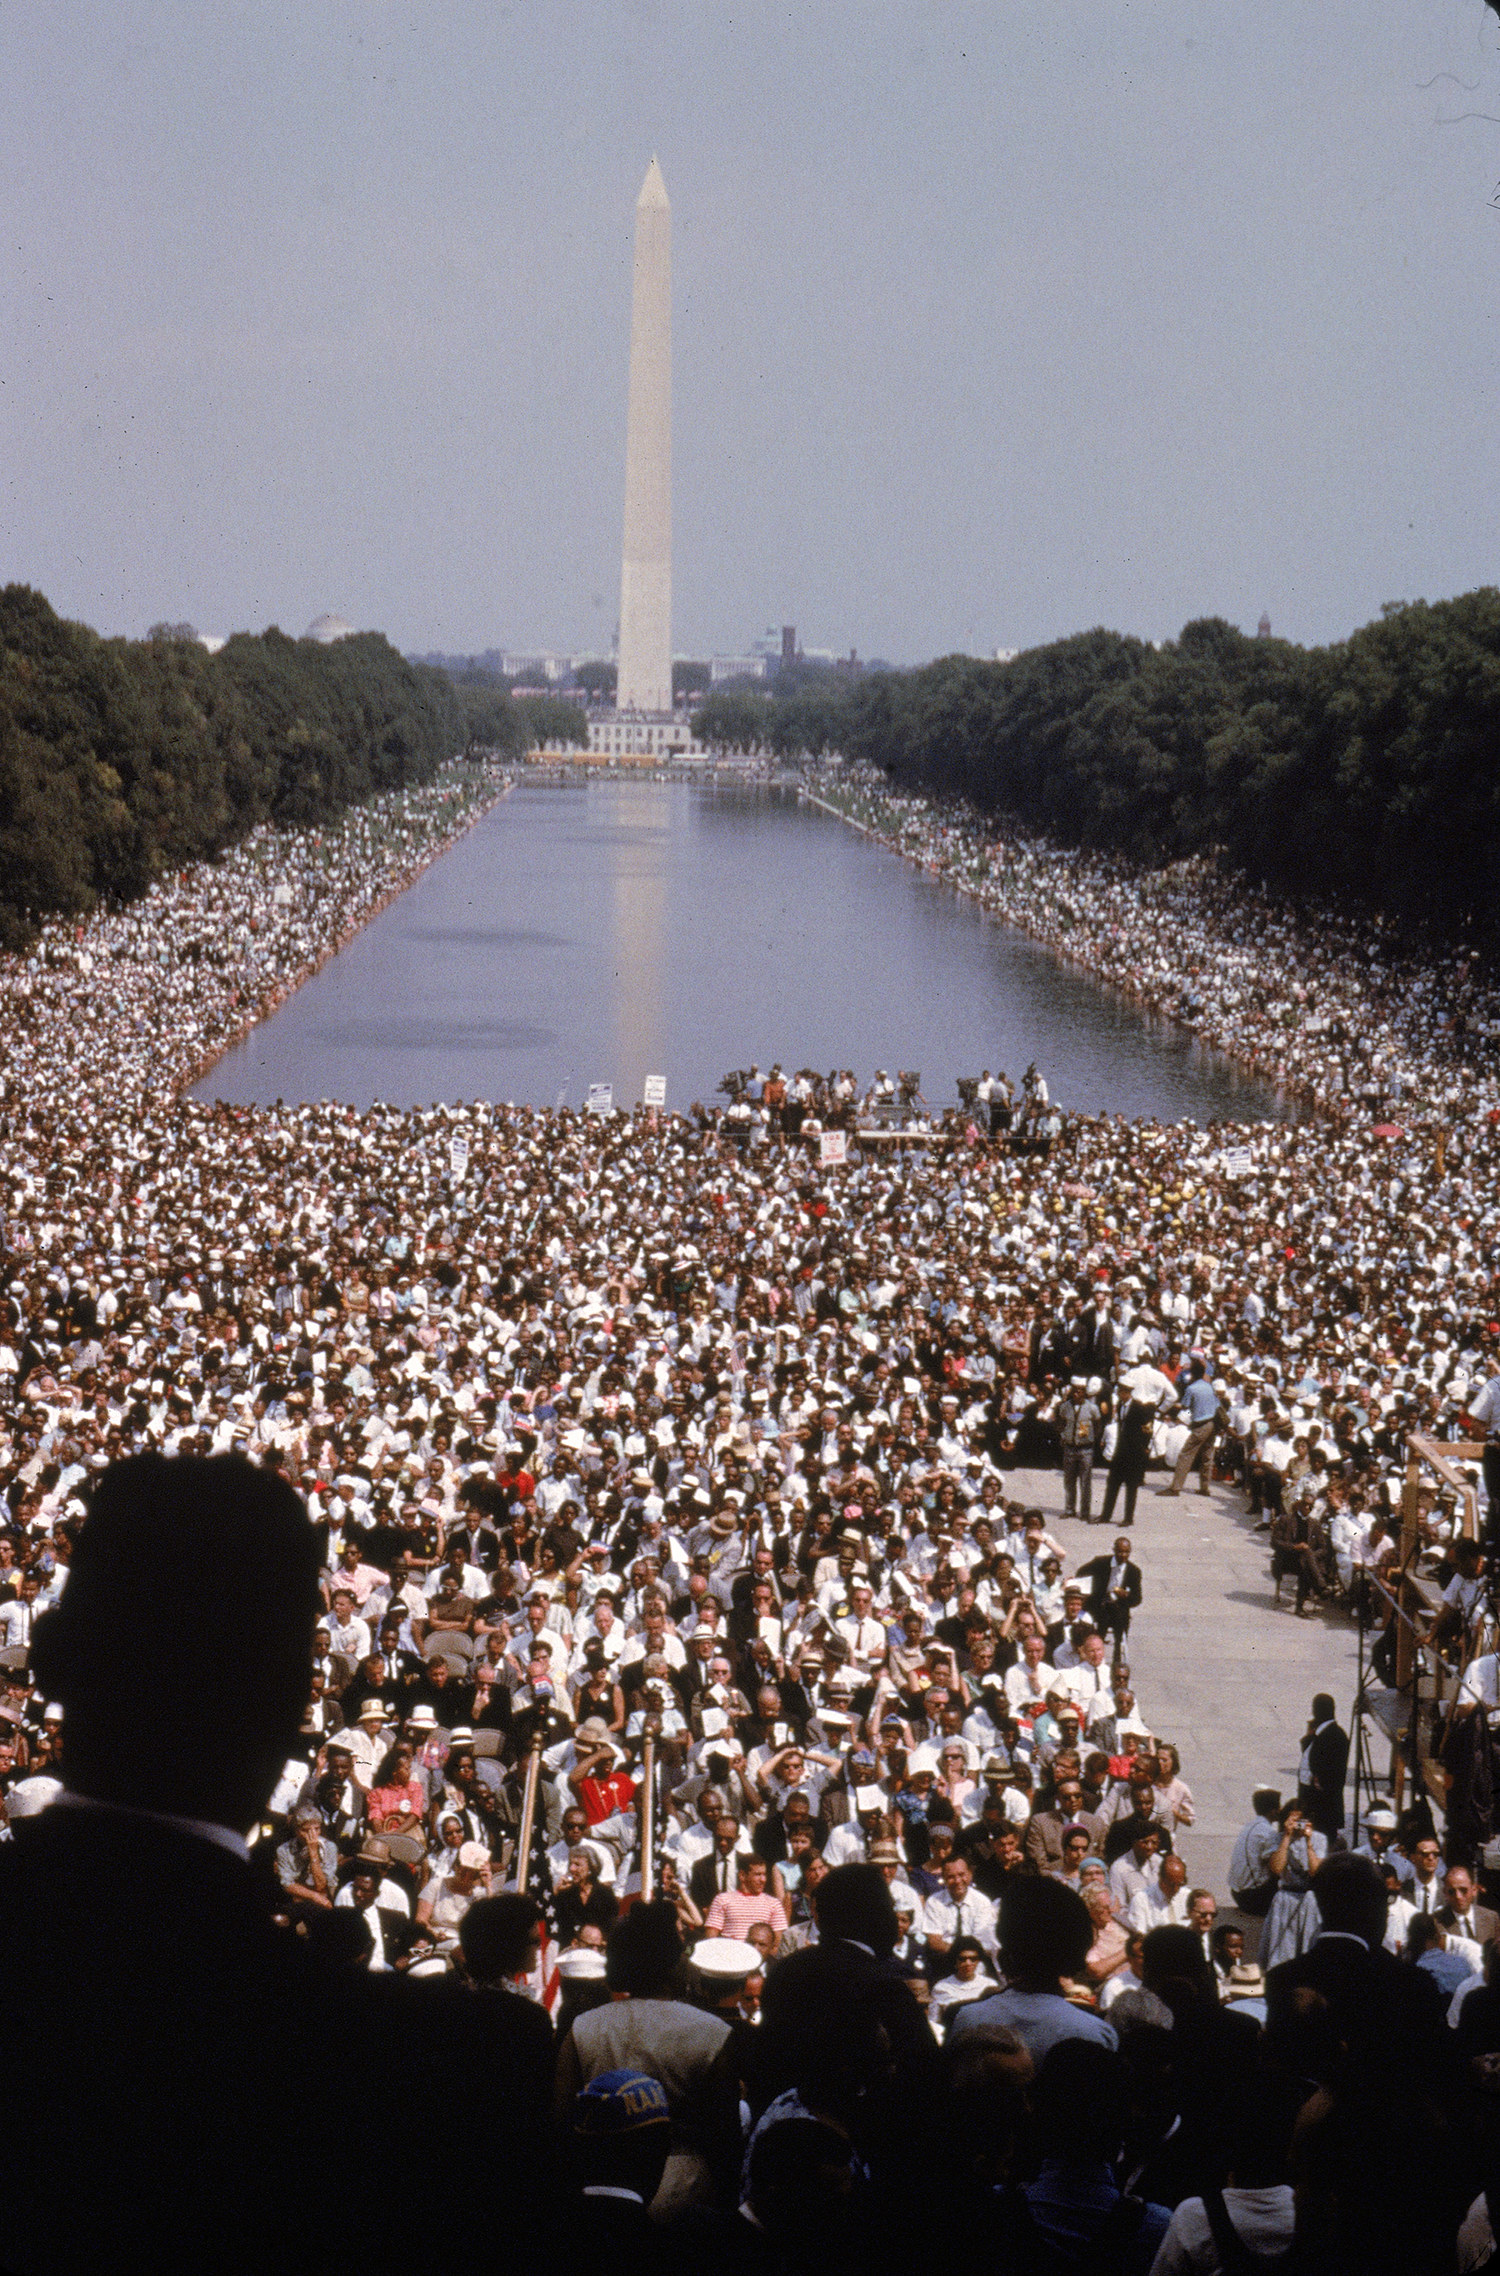 A general view of the large crowd around the Washington Monument and reflecting pool.